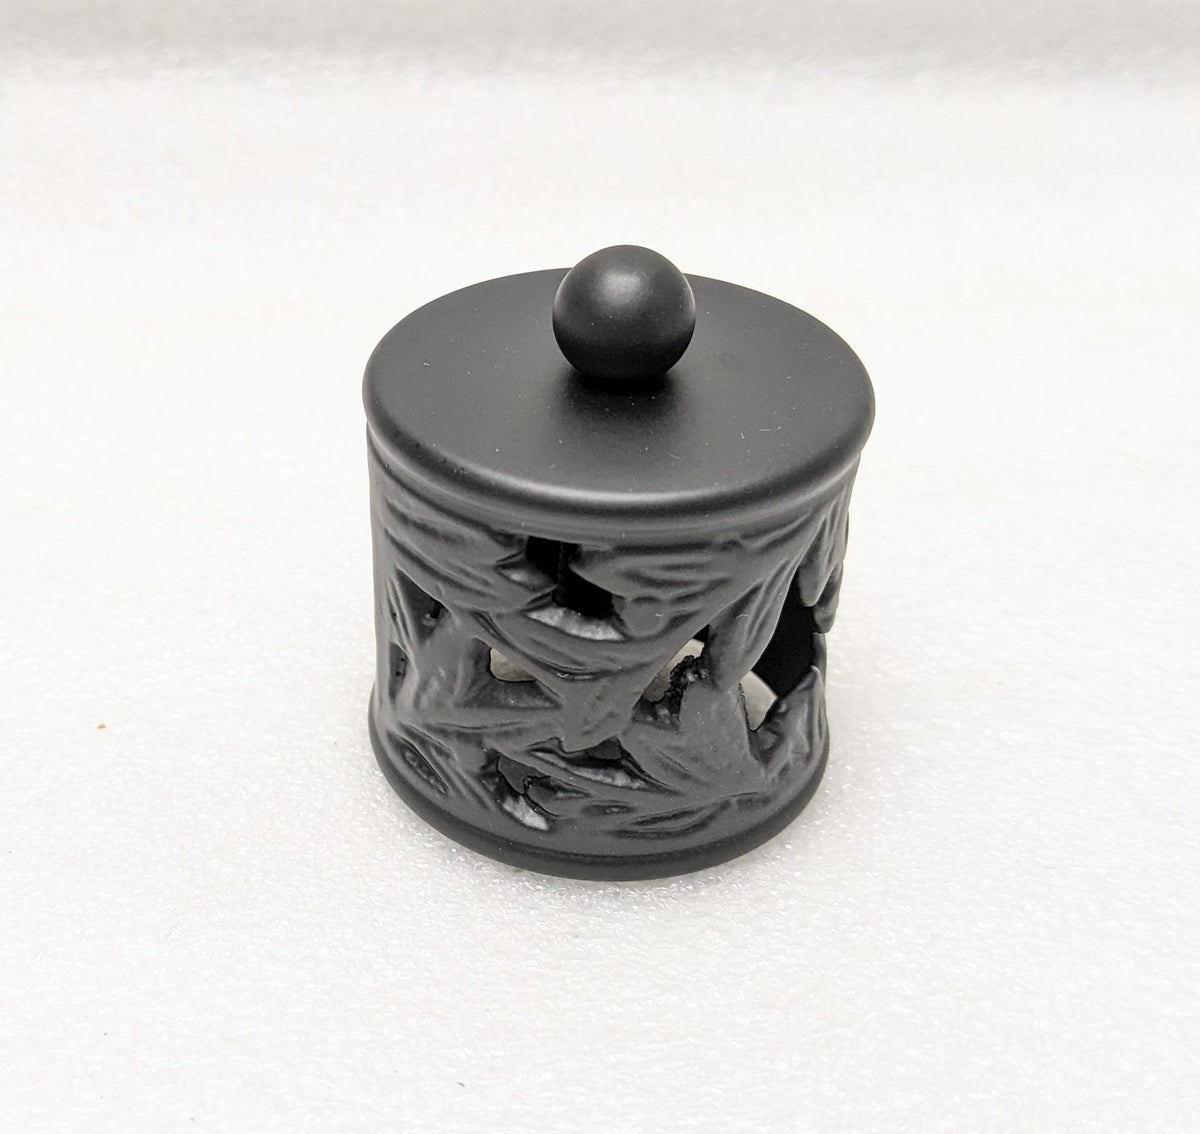 Filigree End Cap for 1-1/2" Tubing END CAPS AND FINIALS,COMPONENTS FOR 1-1/2" OD TUBING Matte-Black-Powder-Coated-Finish Trade Diversified